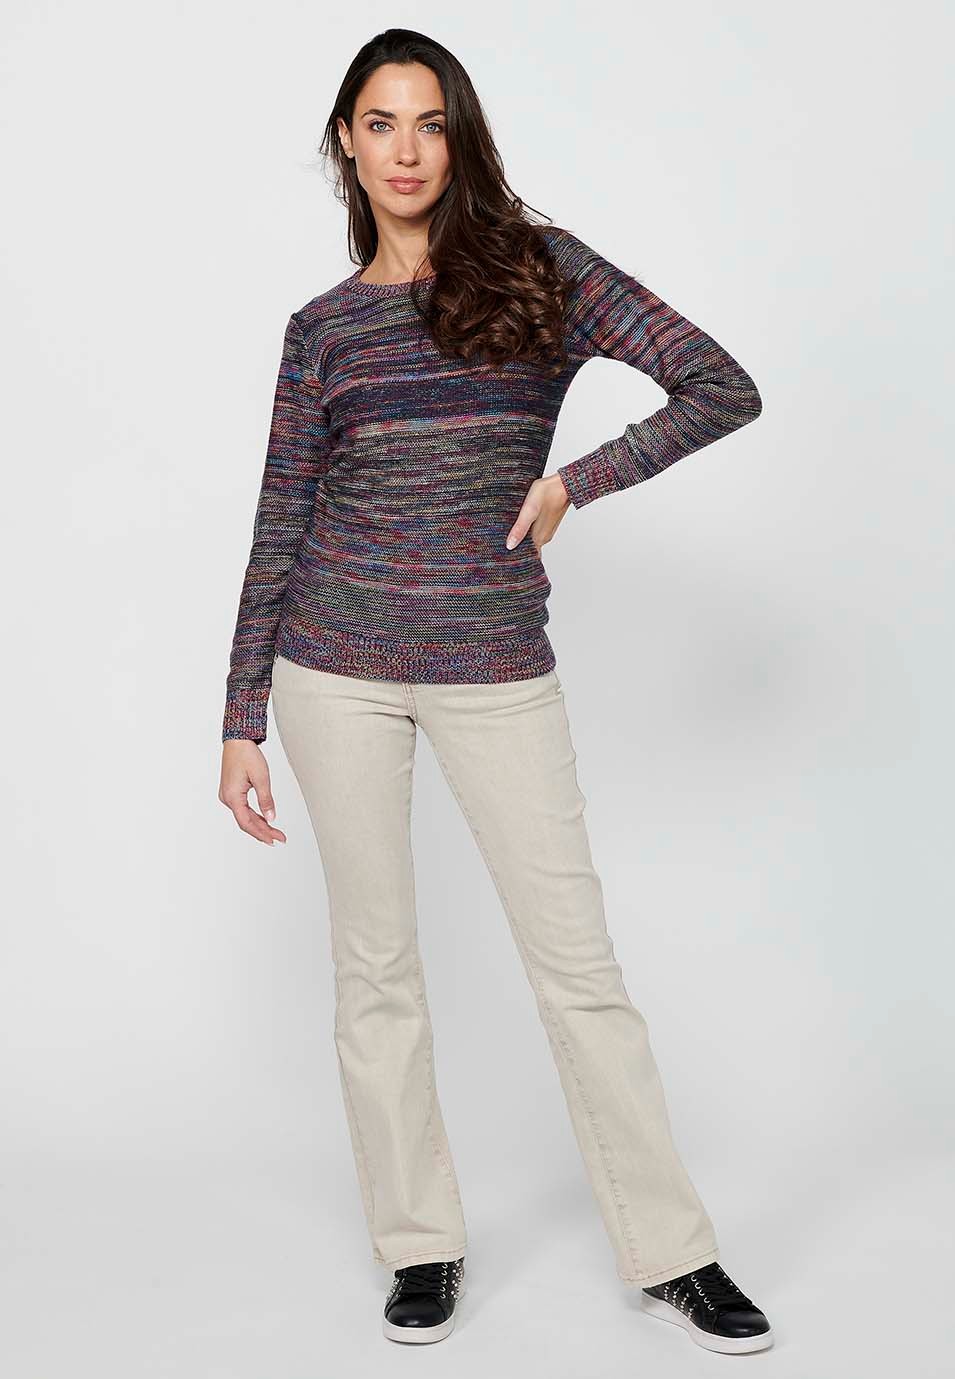 Women's Multicolor Round Neck Long Sleeve Sweater 4